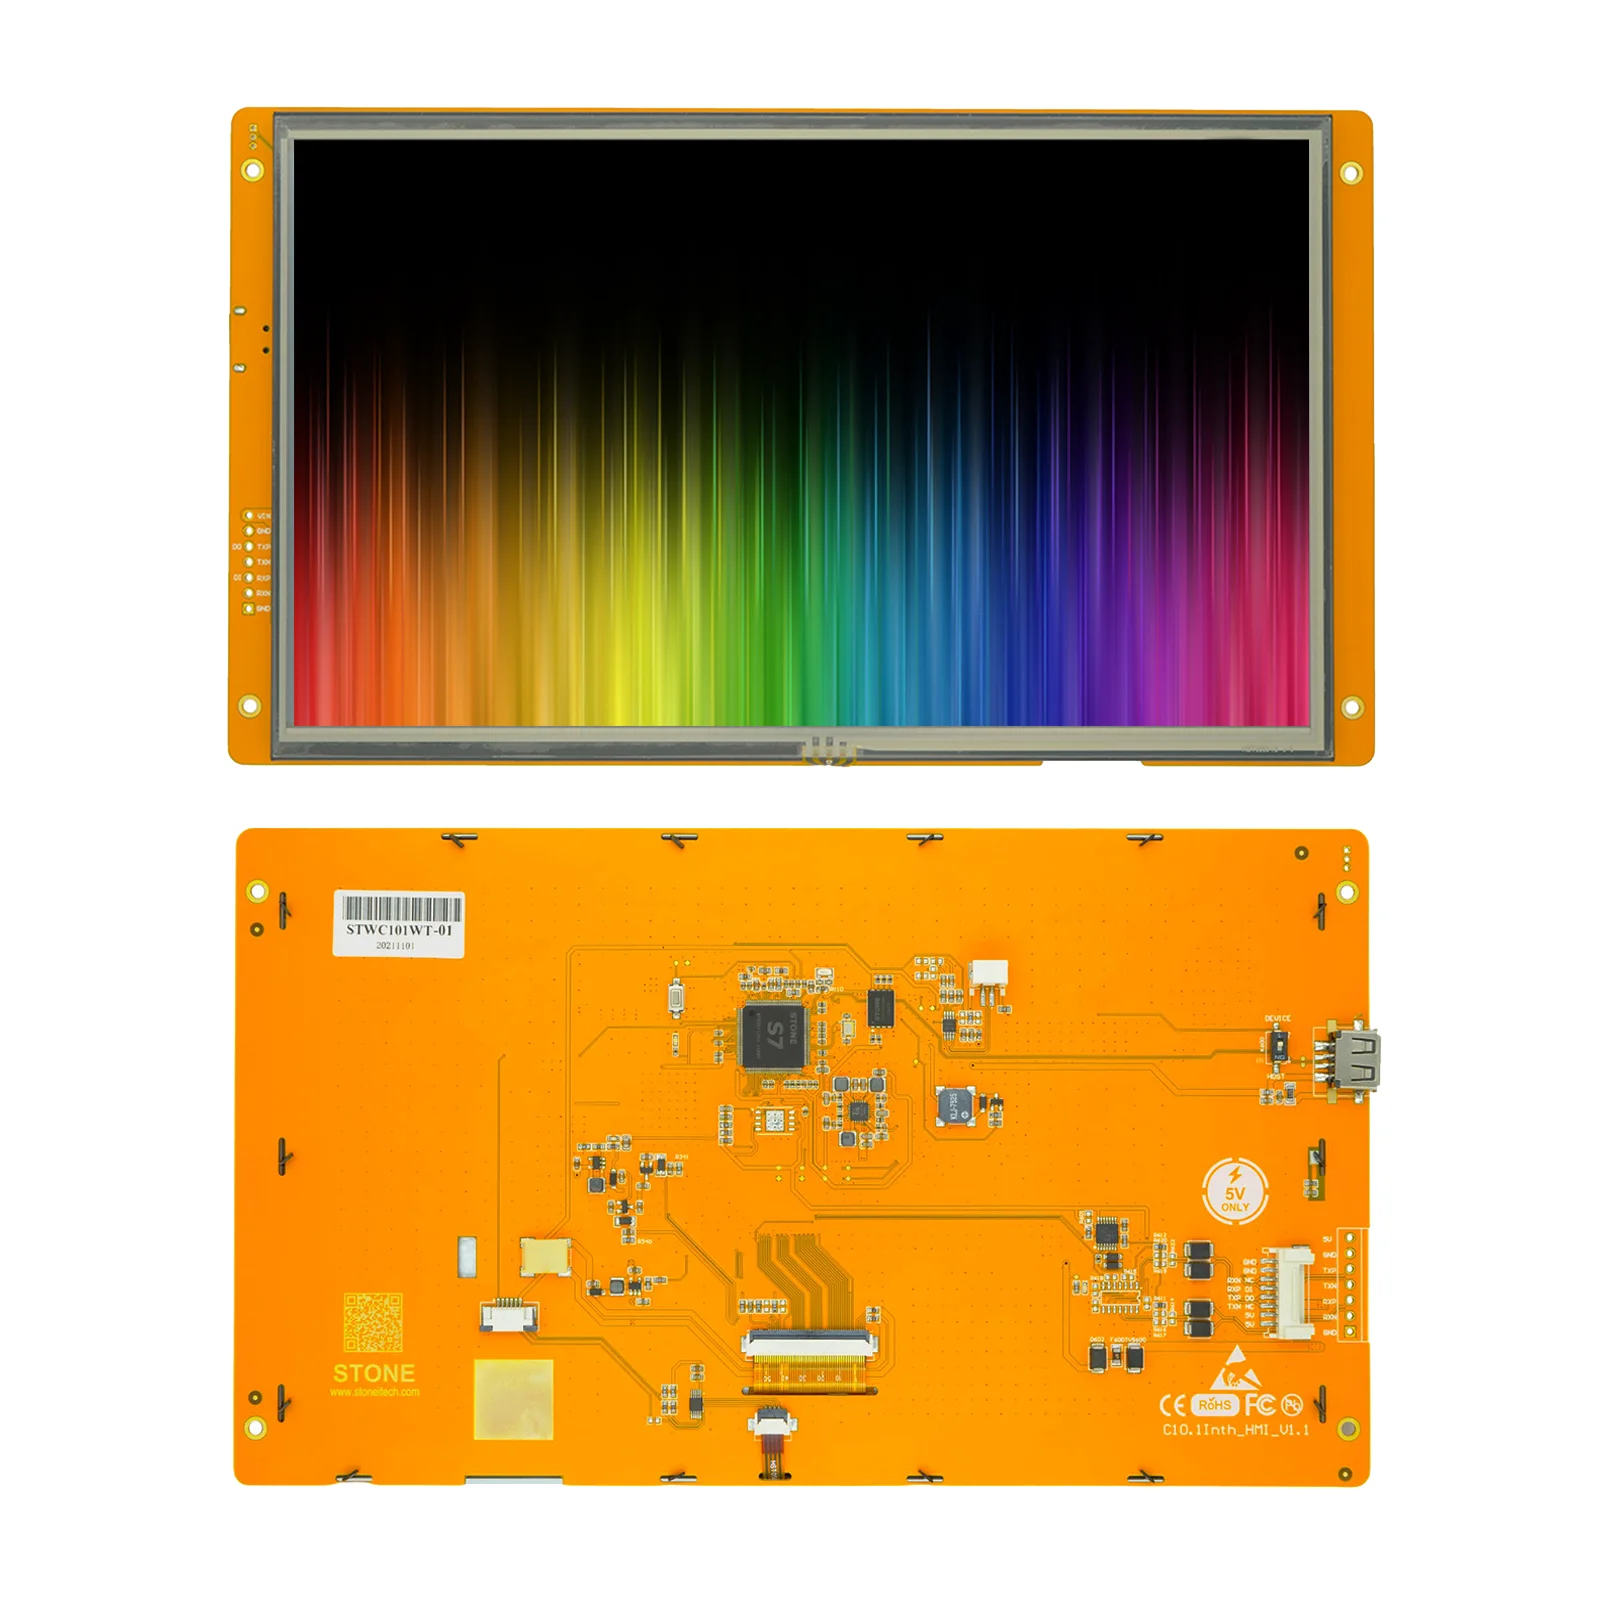 SCBRHMI 10.1 inch HMI Smart LCD Display Module with Touch Panel + Program + Uart Port for Industry Control